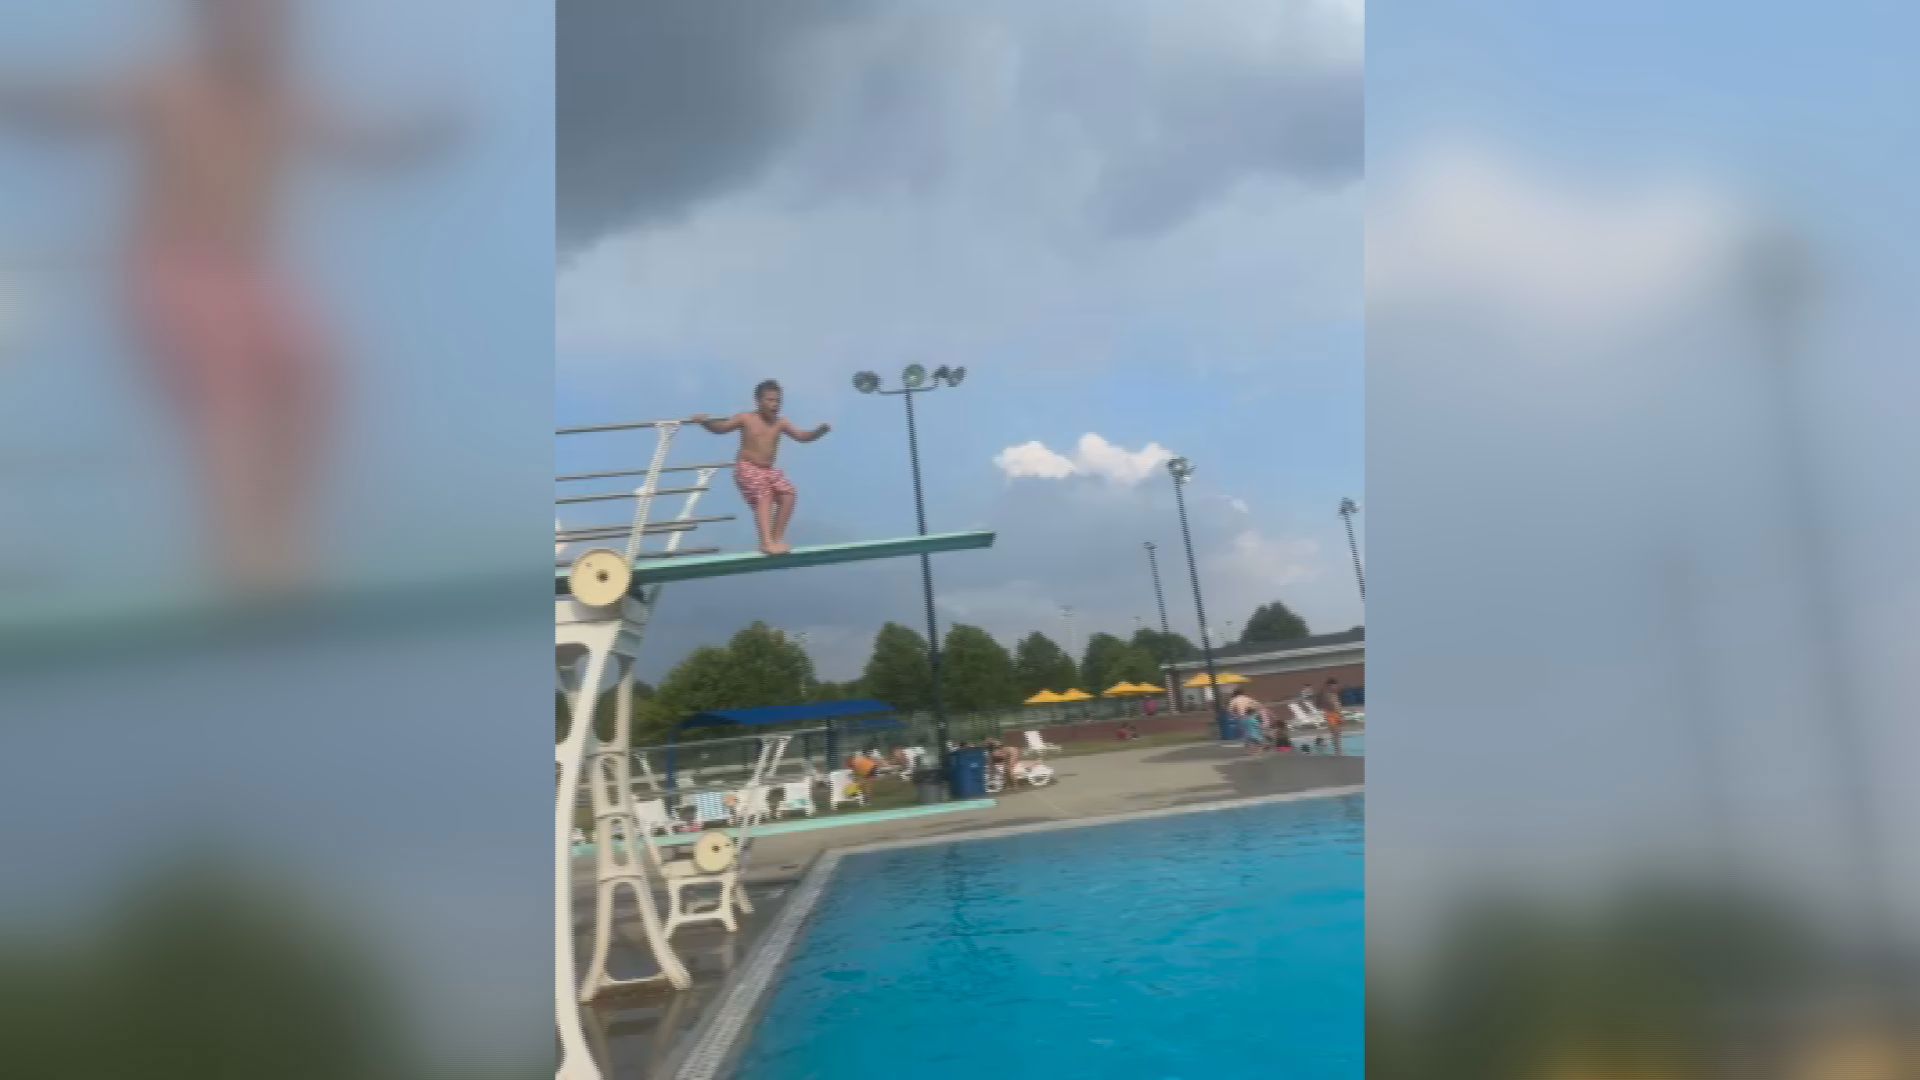 Ethan Beer fell from about 10 feet in the air at Perrysburg Municipal Pool on June 17.